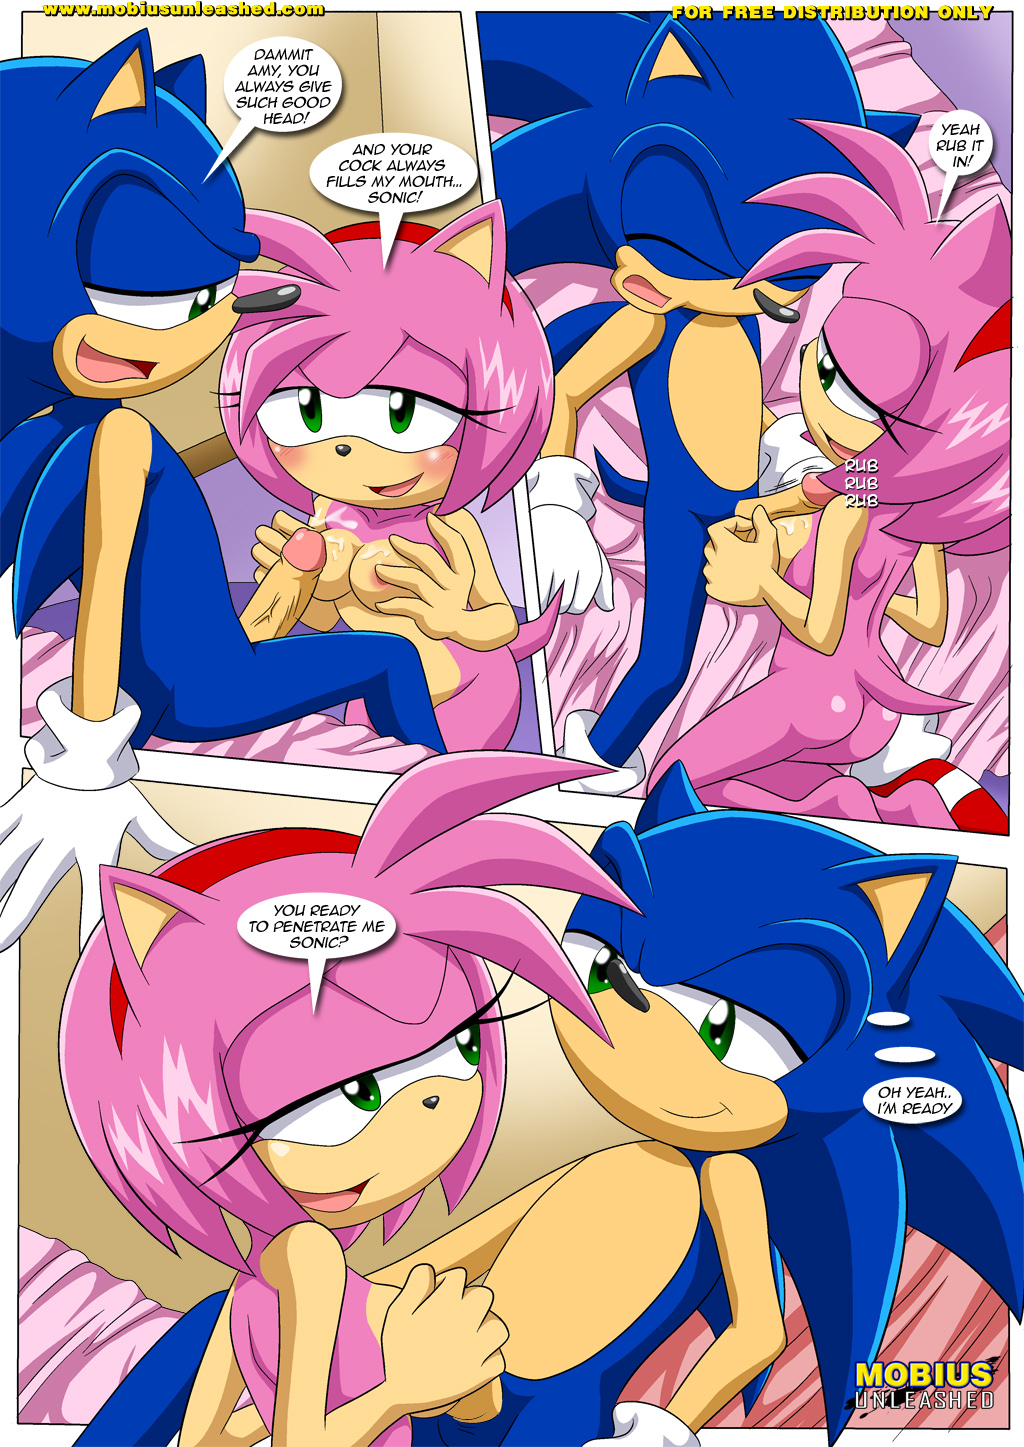 rose hedgehog the amy sonic Steven universe lapis and steven